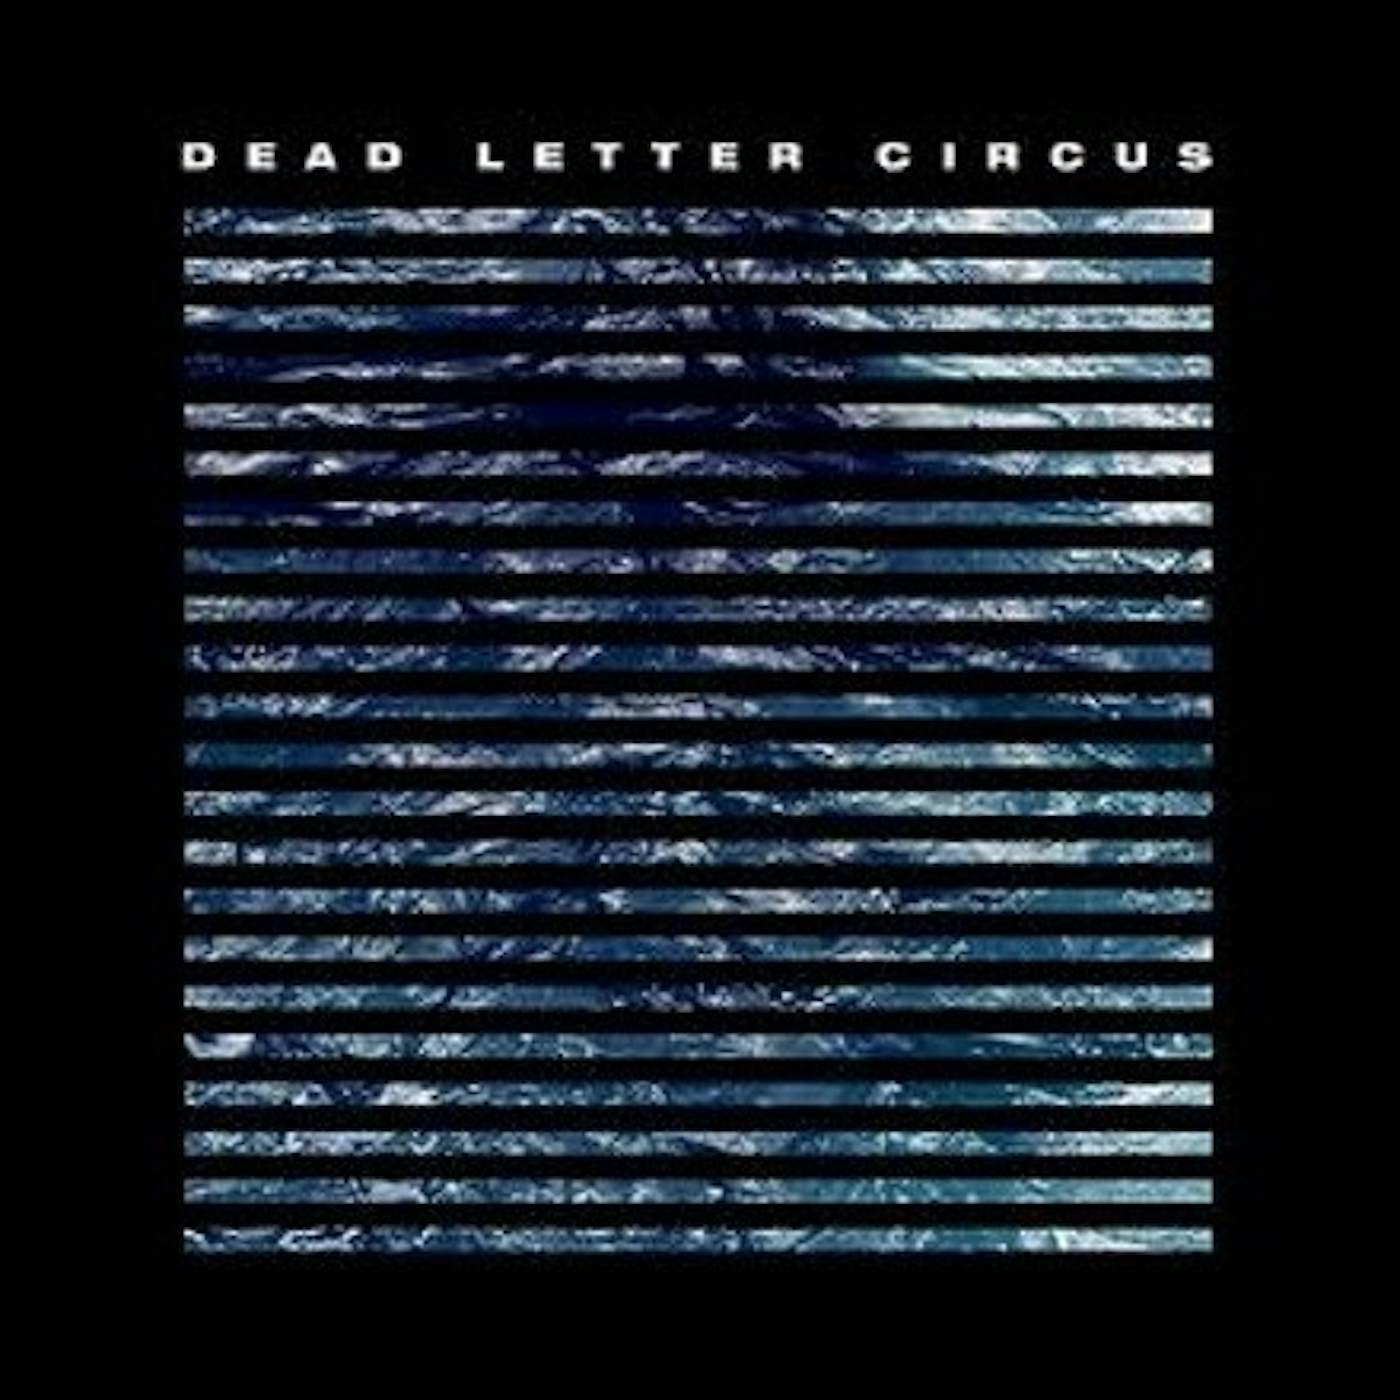 DEAD LETTER CIRCUS CD